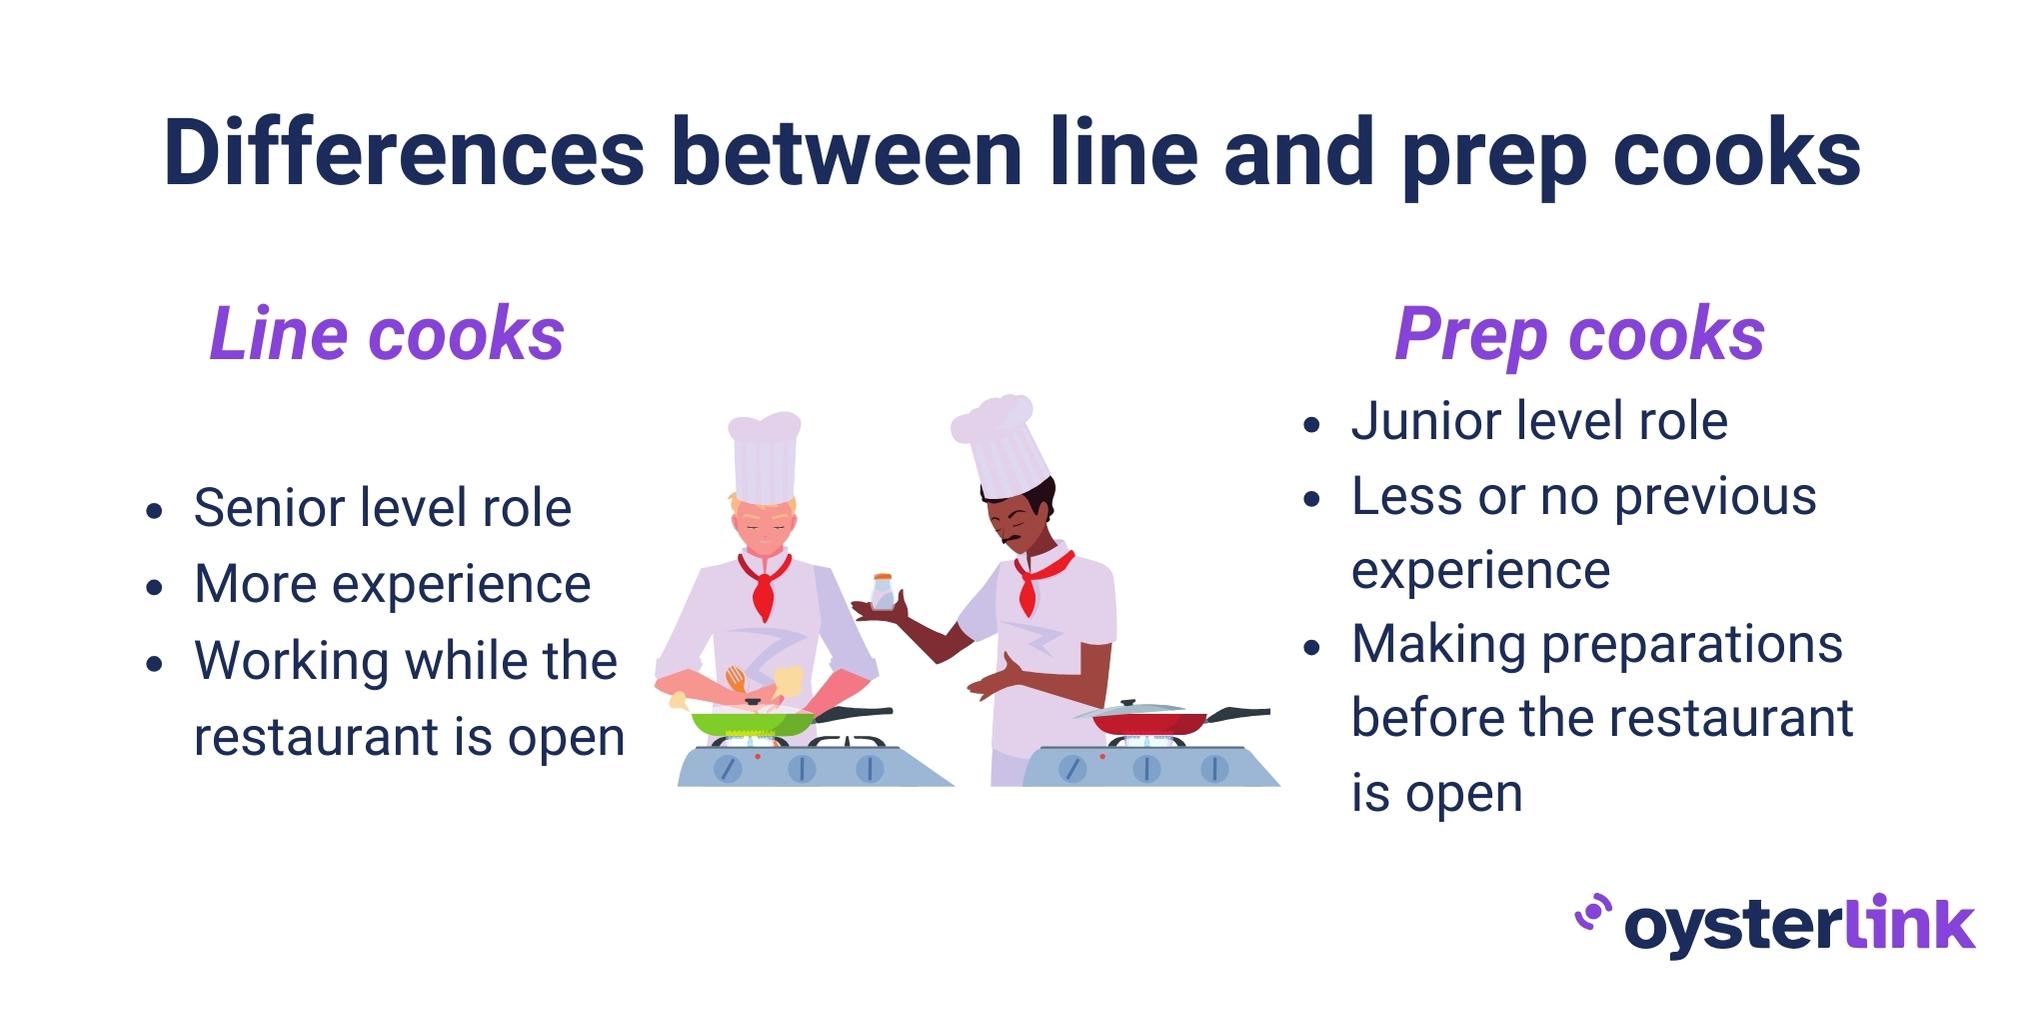 Differences between line and prep cooks